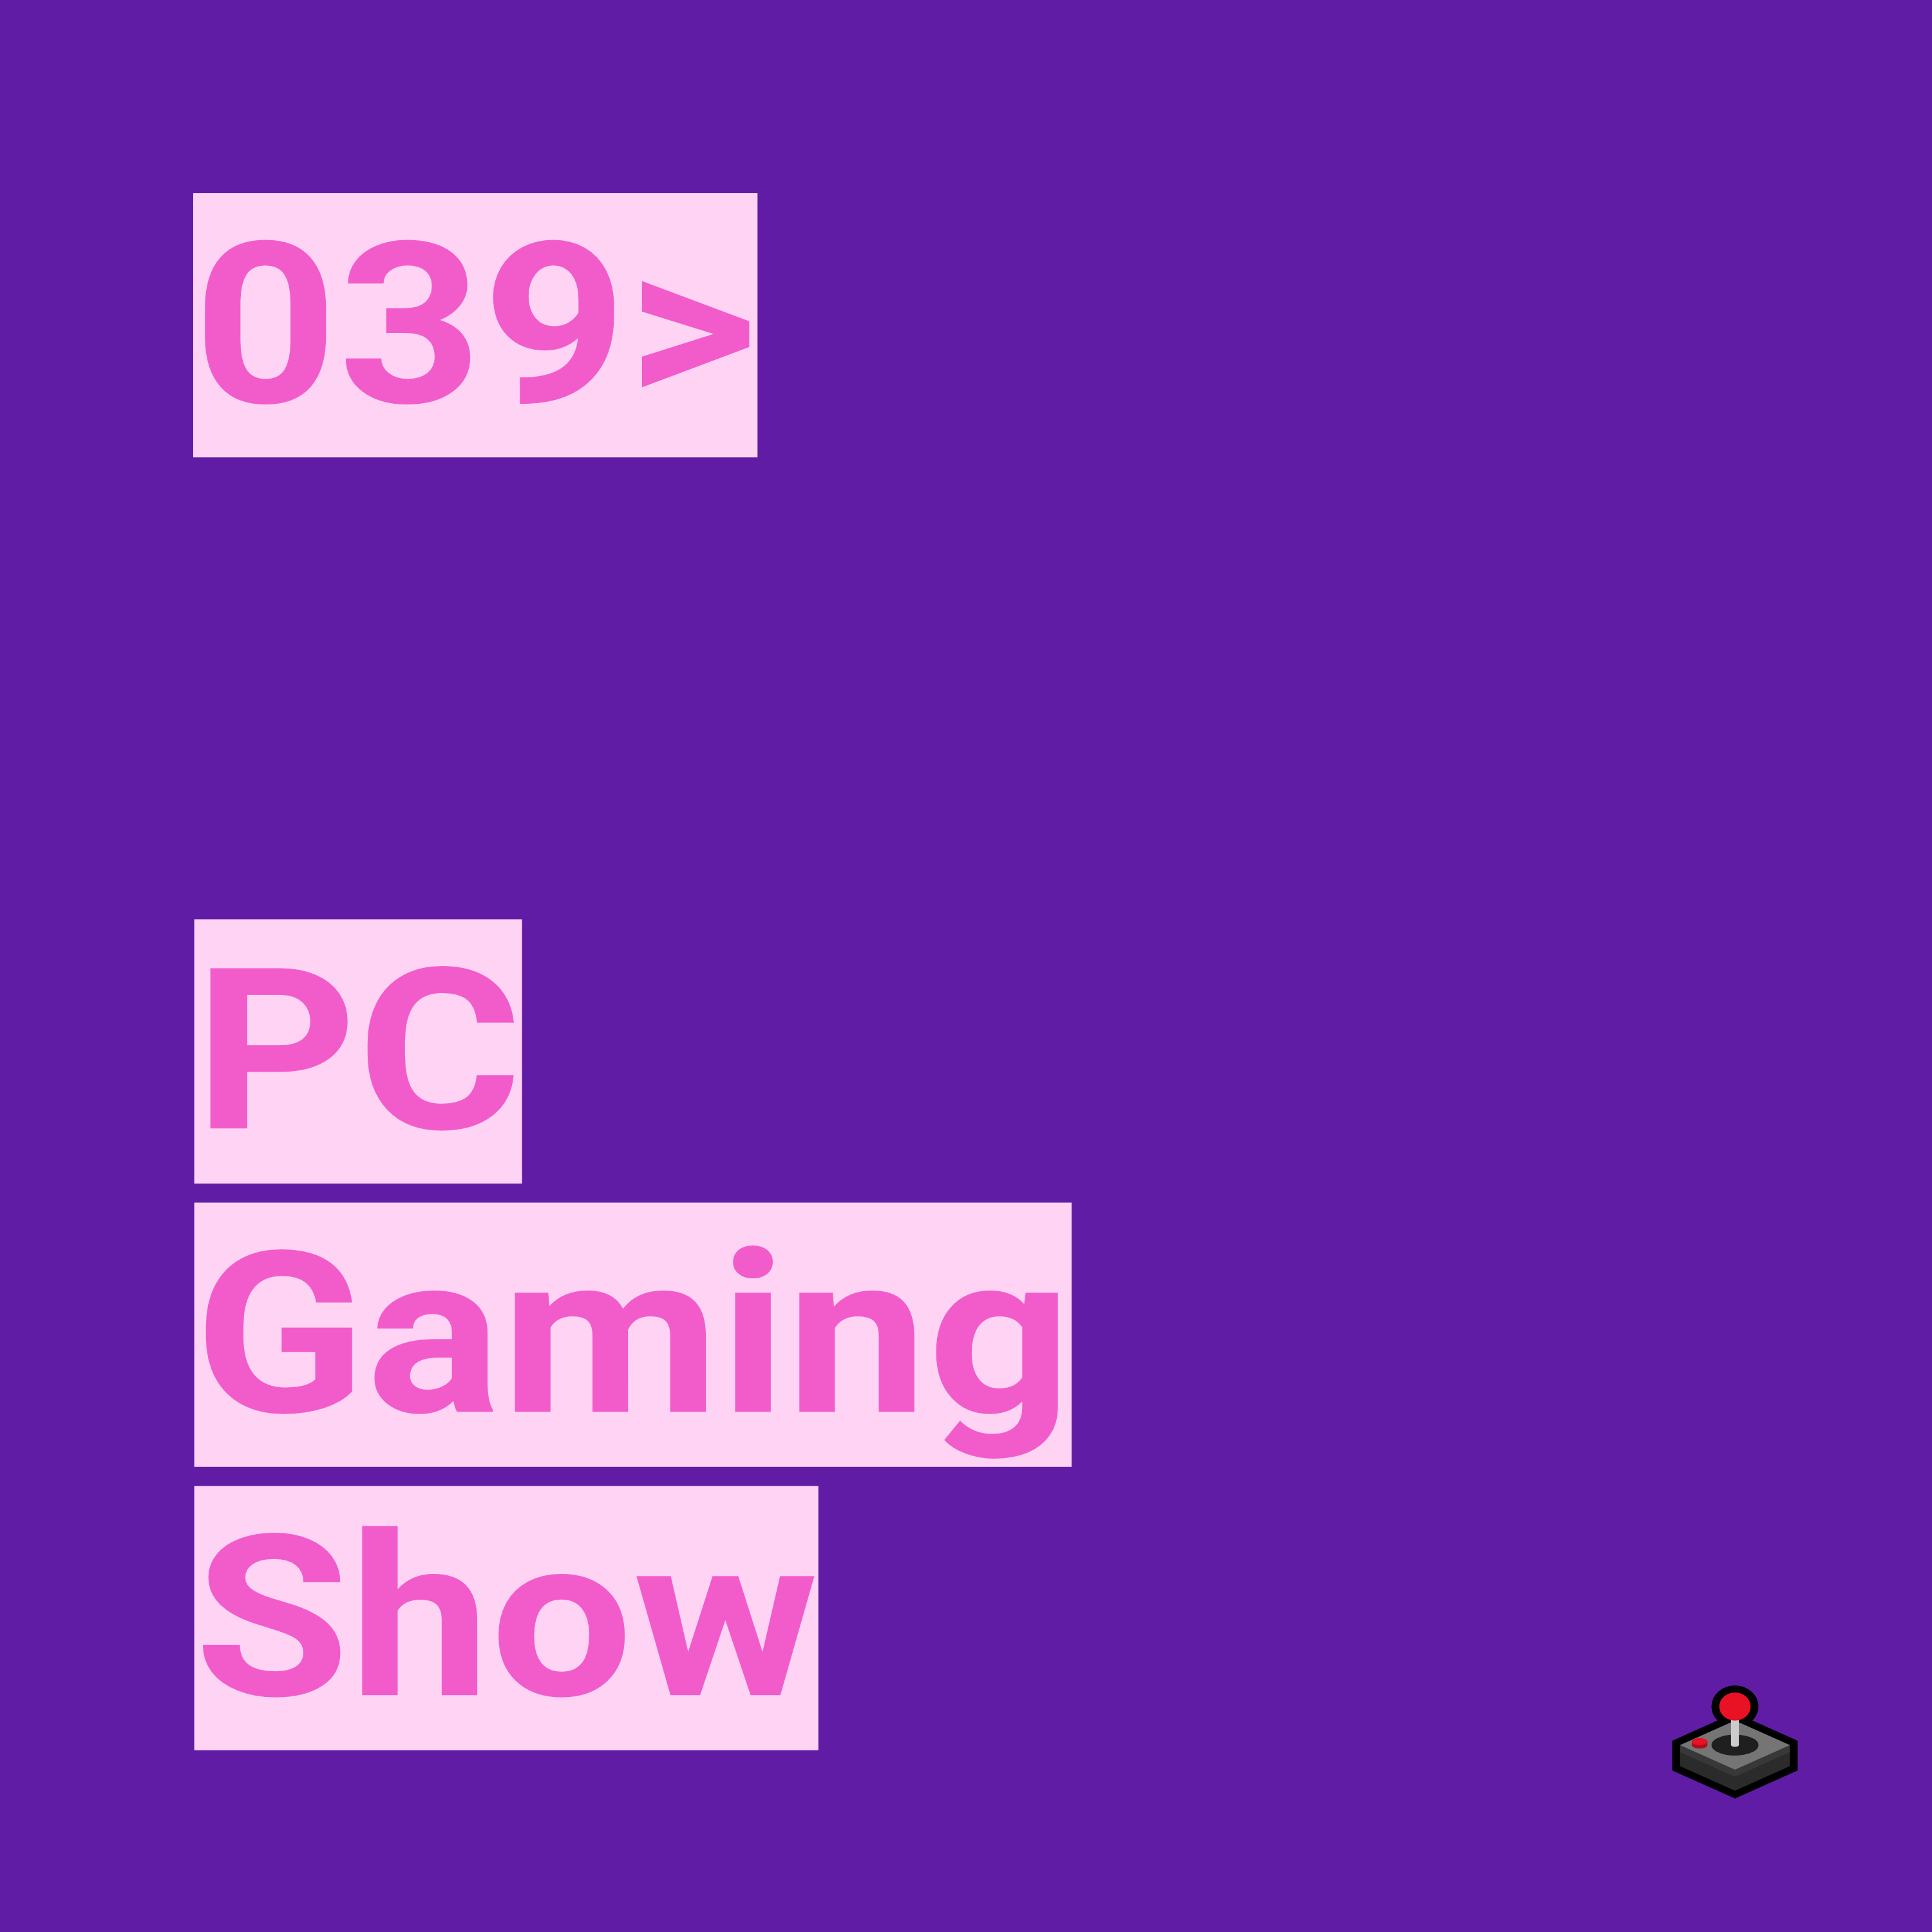 039. PC Gaming Show